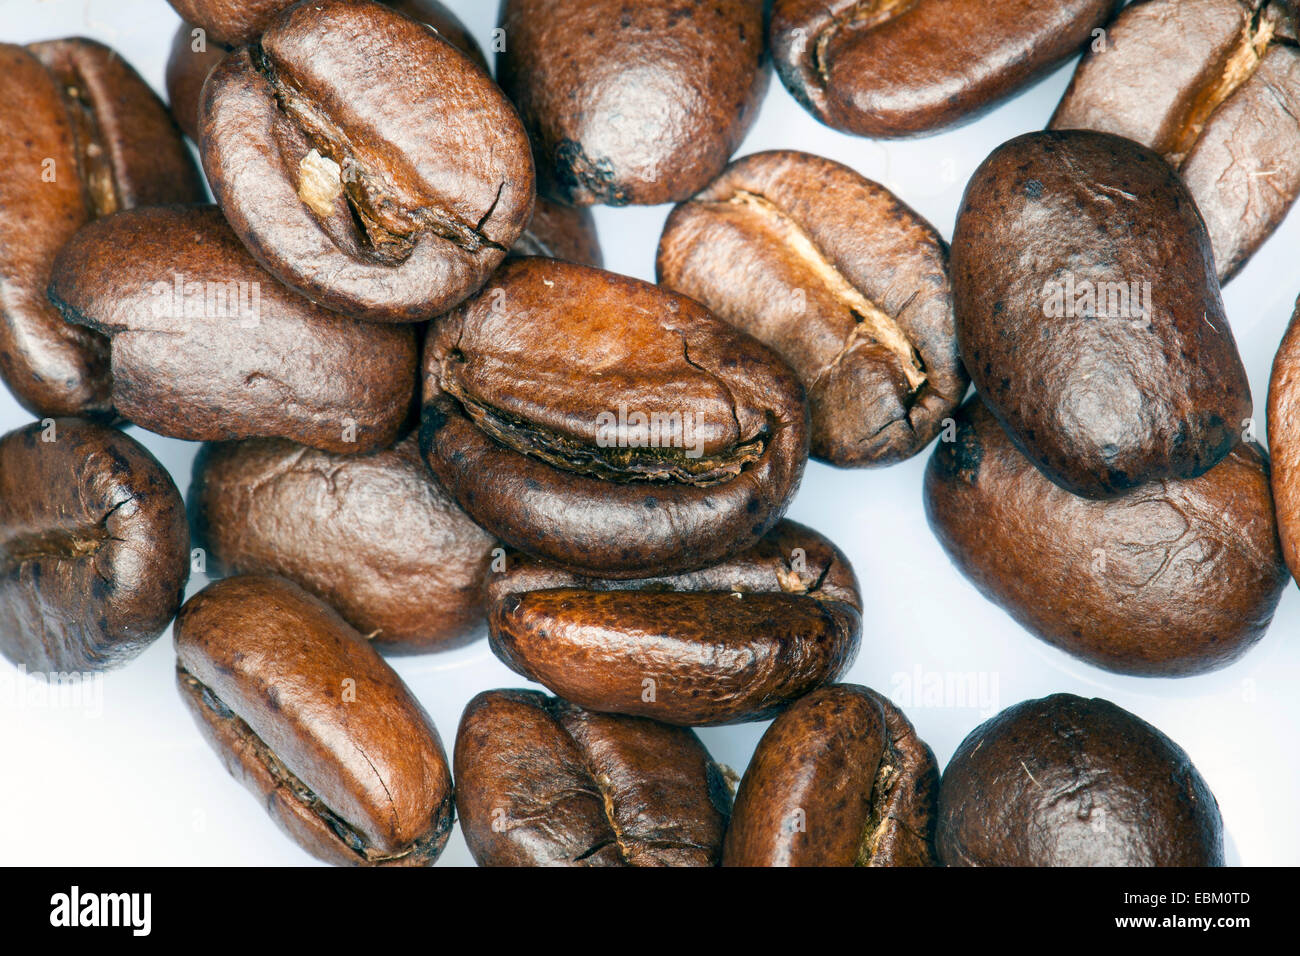 roasted coffee beans Stock Photo